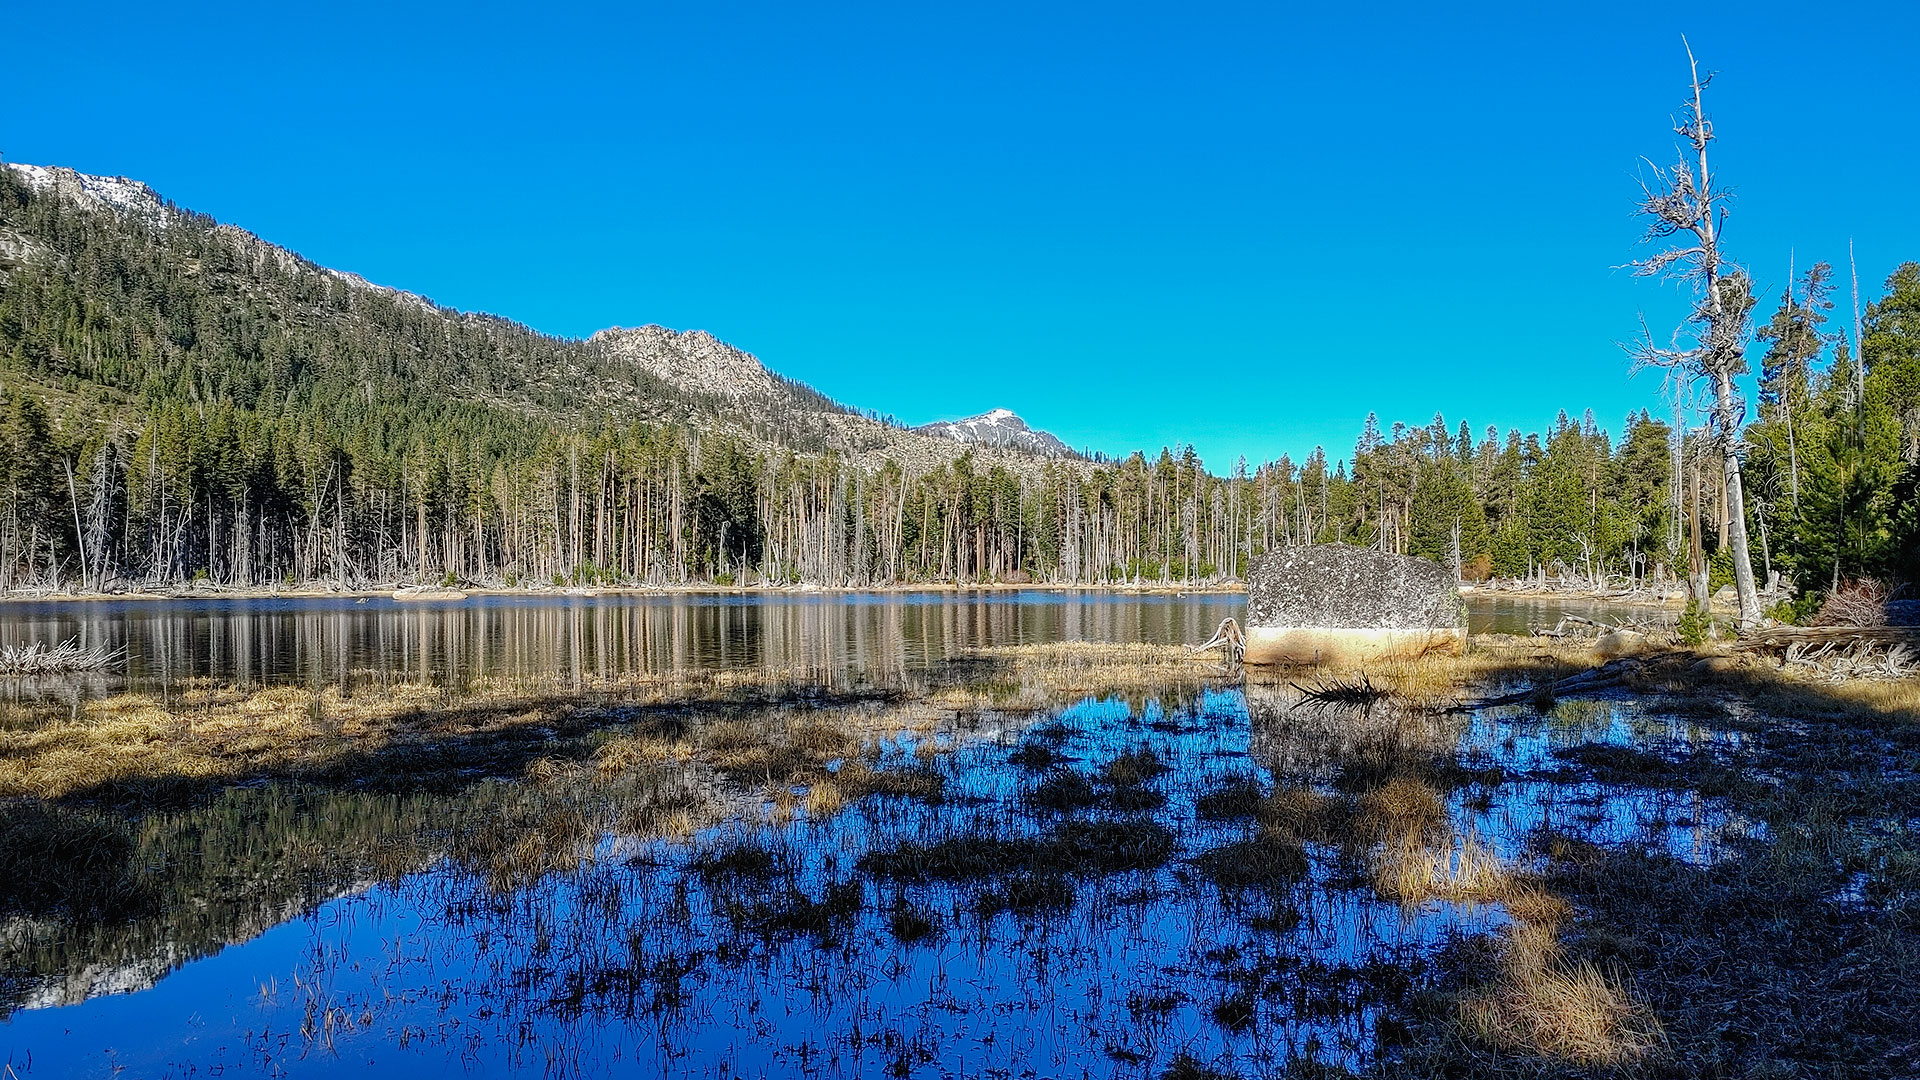 Shallow lake with pine trees, mountains, and blue skies